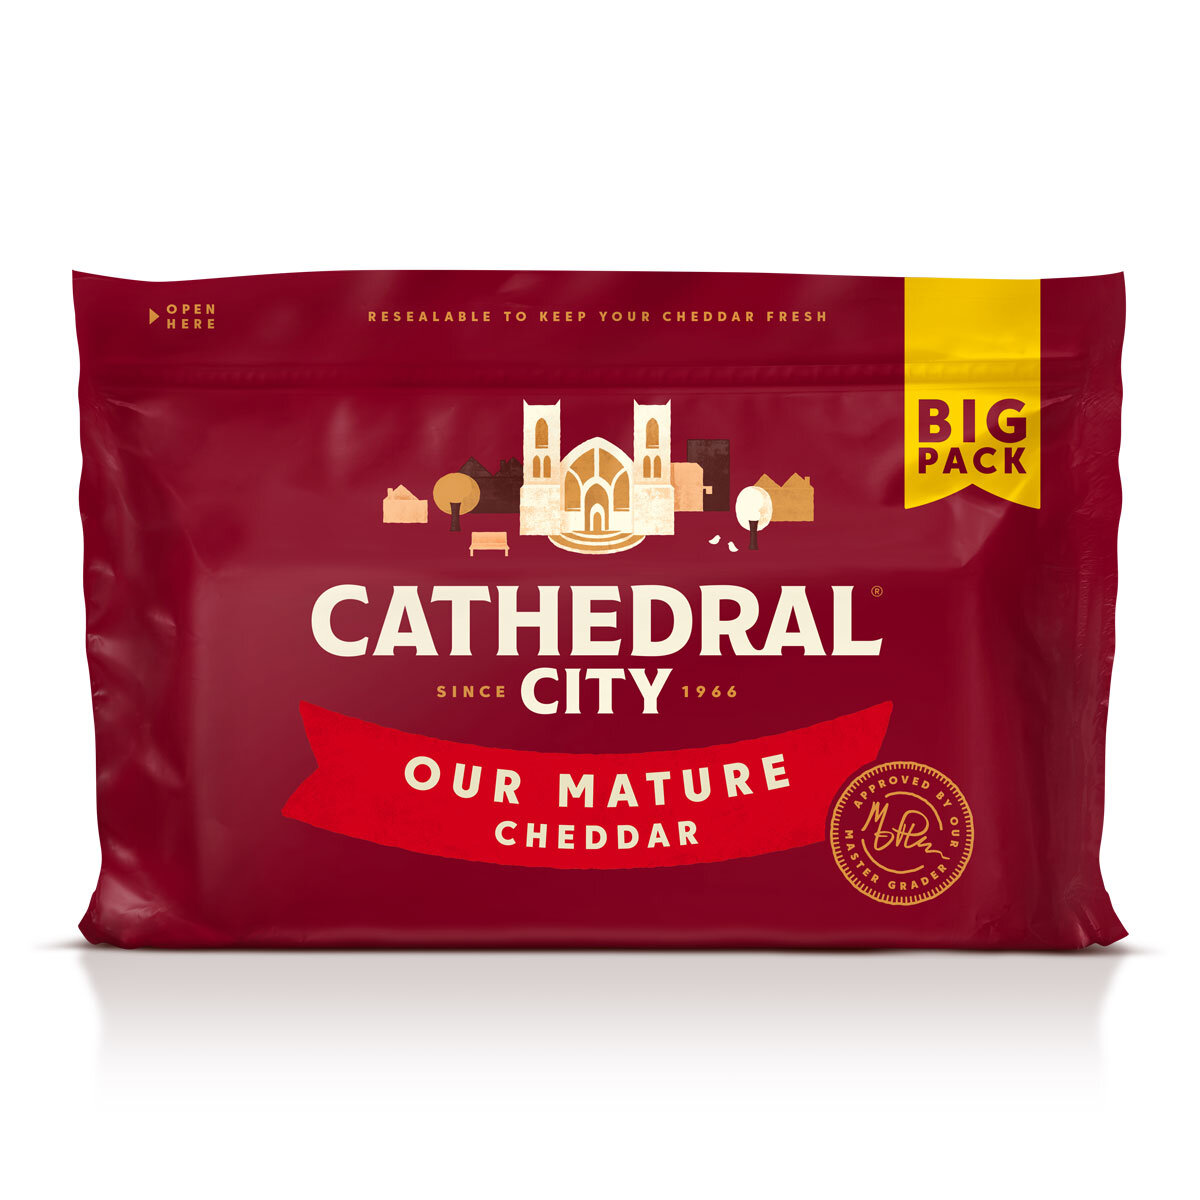 Cathedral City Mature Cheddar Big Pack